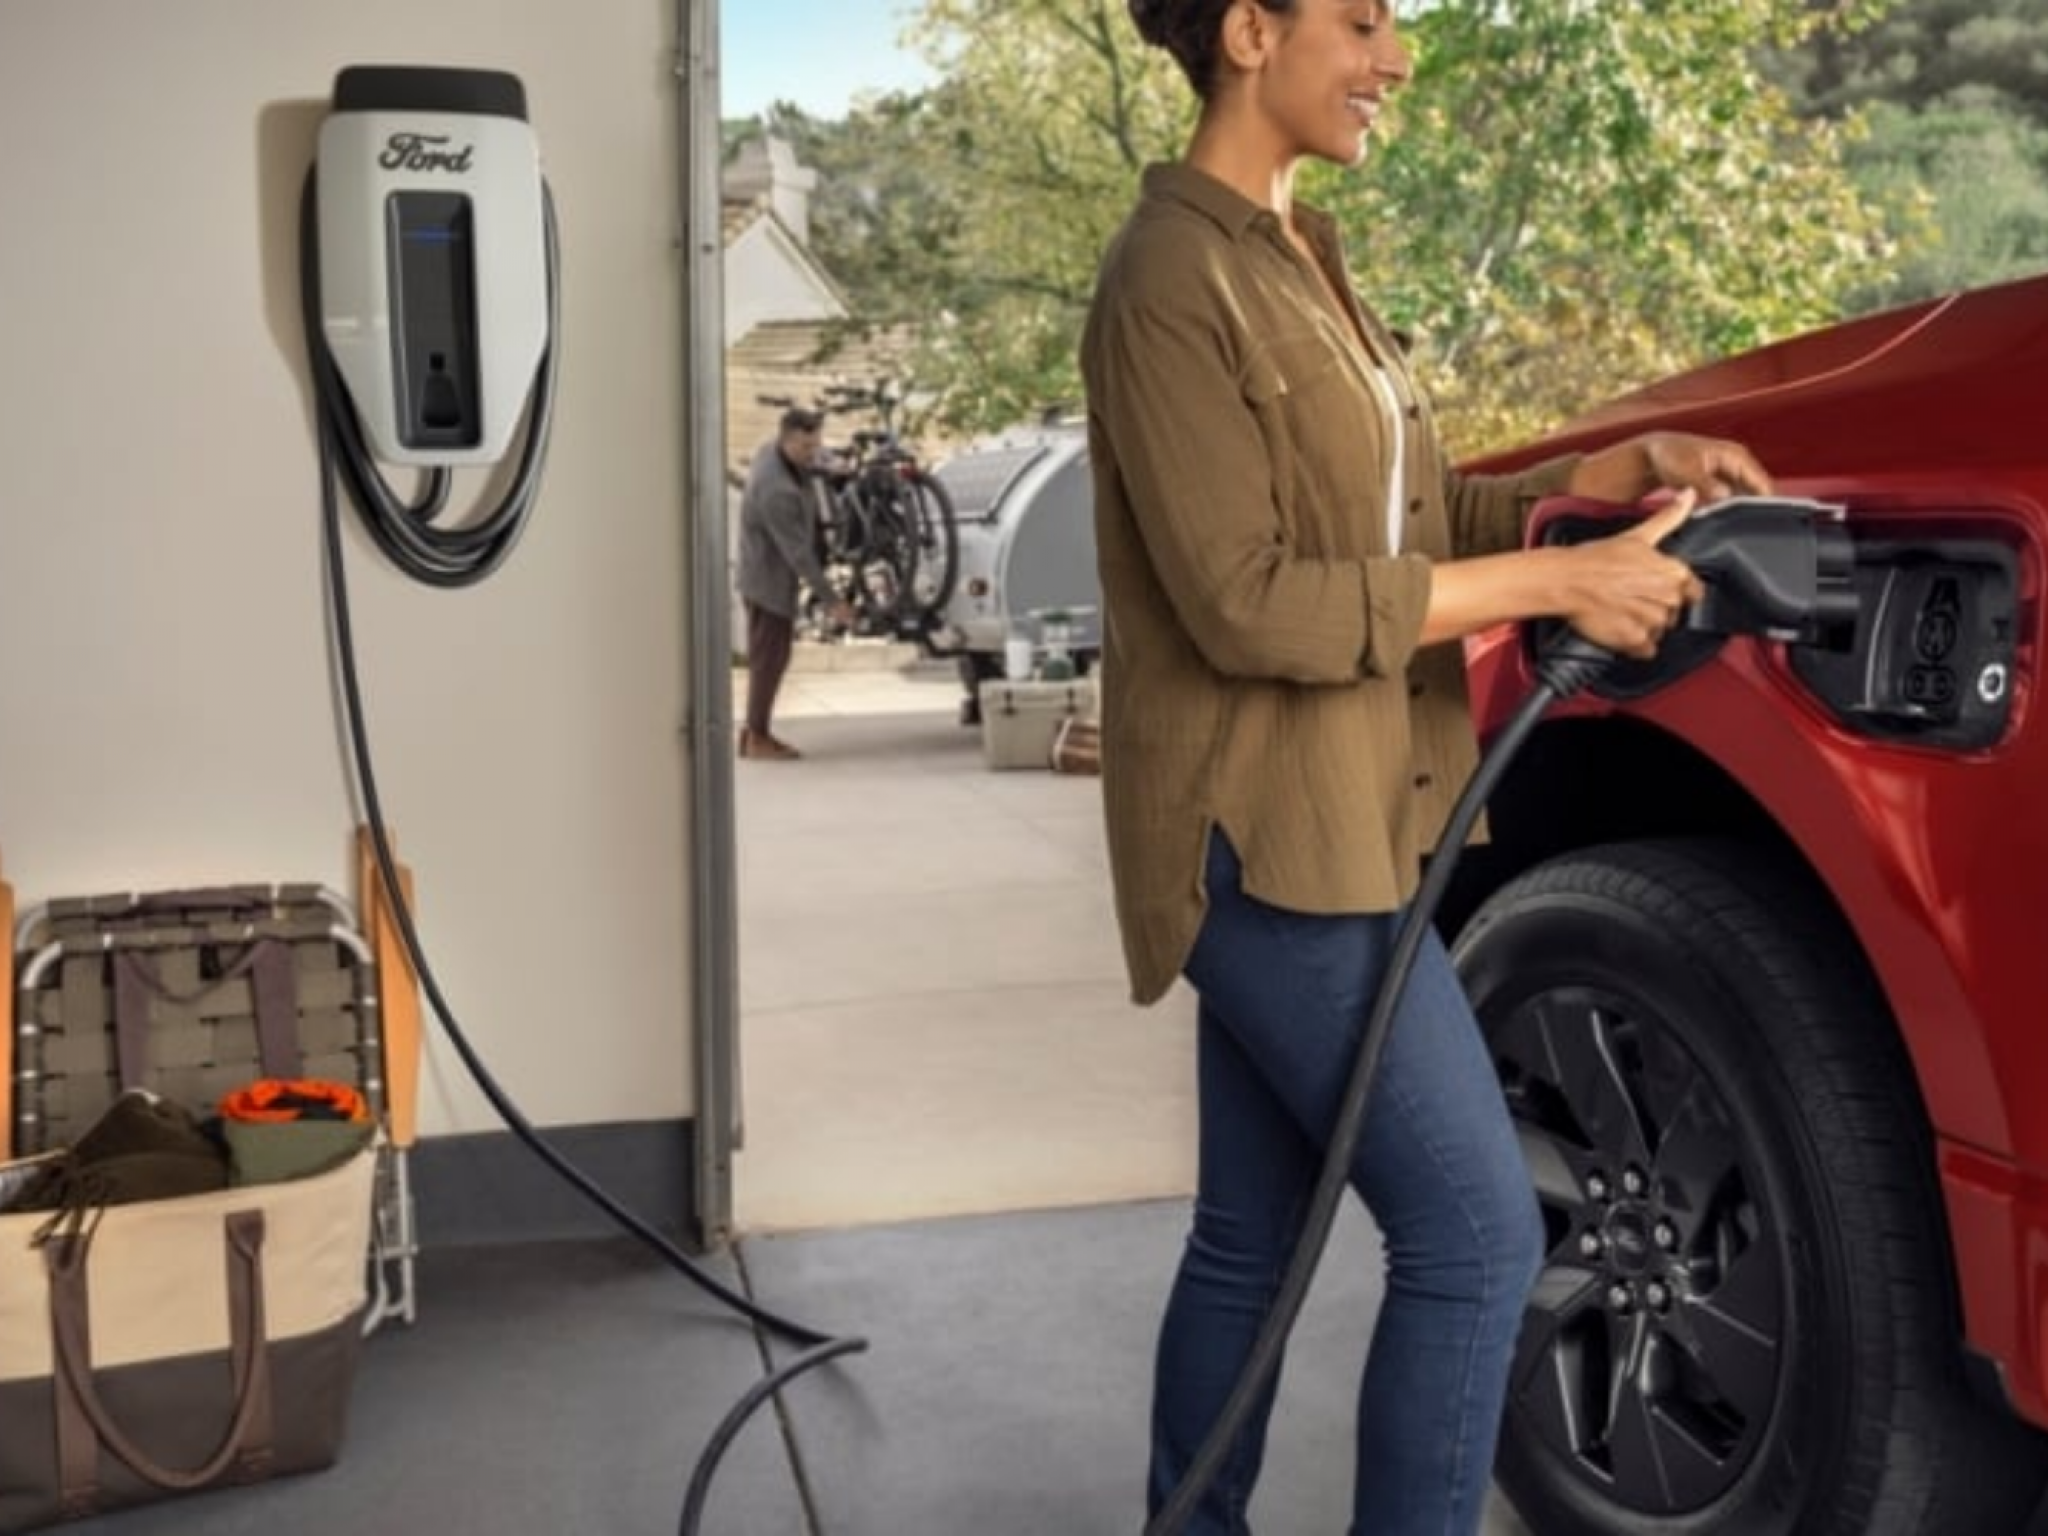  ford-and-resideo-launch-ev-home-power-partnership-project---whats-the-benefit 